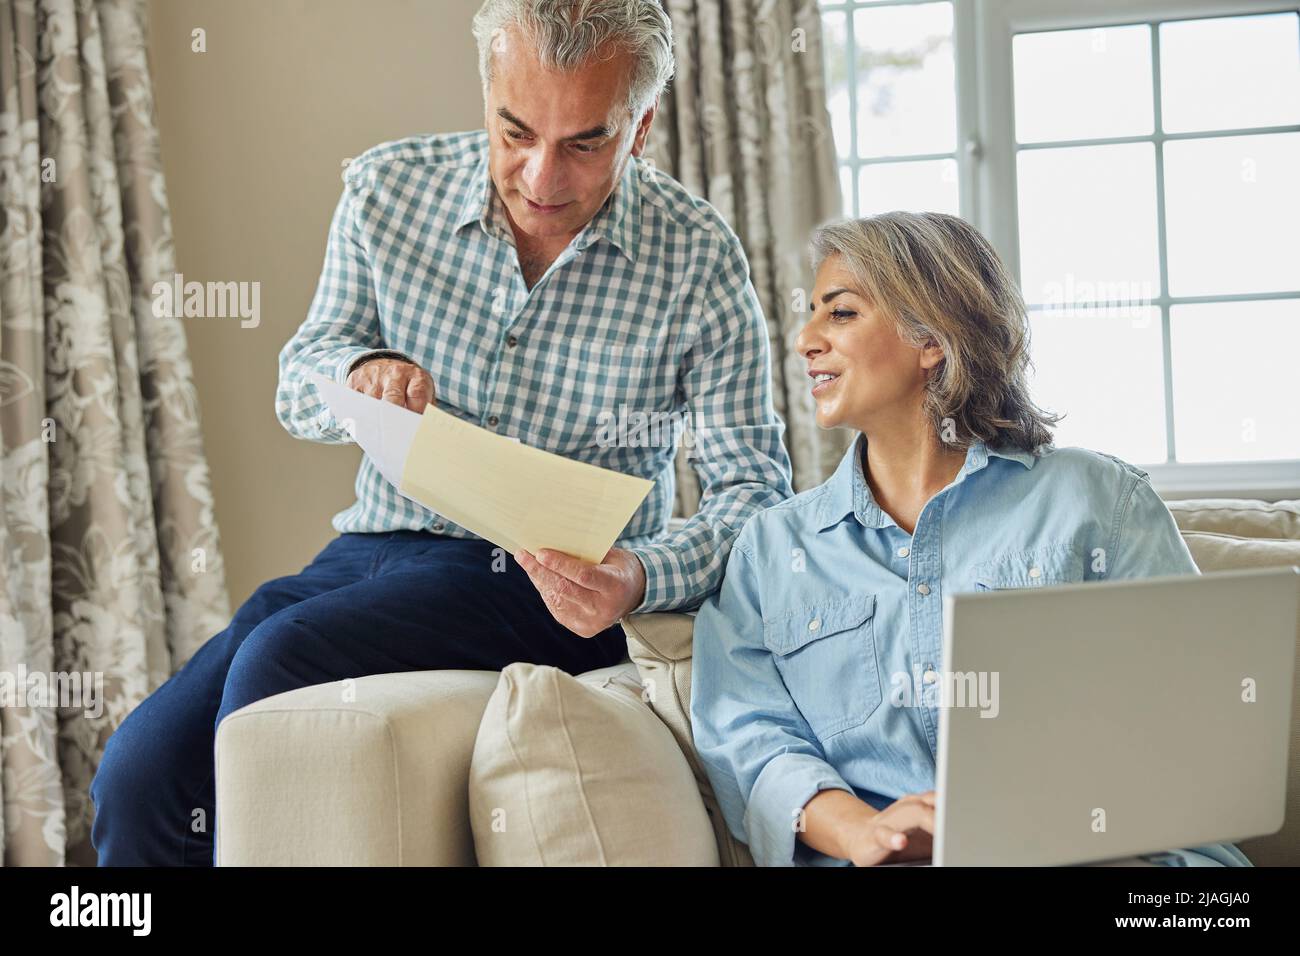 Smiling Mature Couple At Home Reviewing Domestic Finances On Laptop Stock Photo